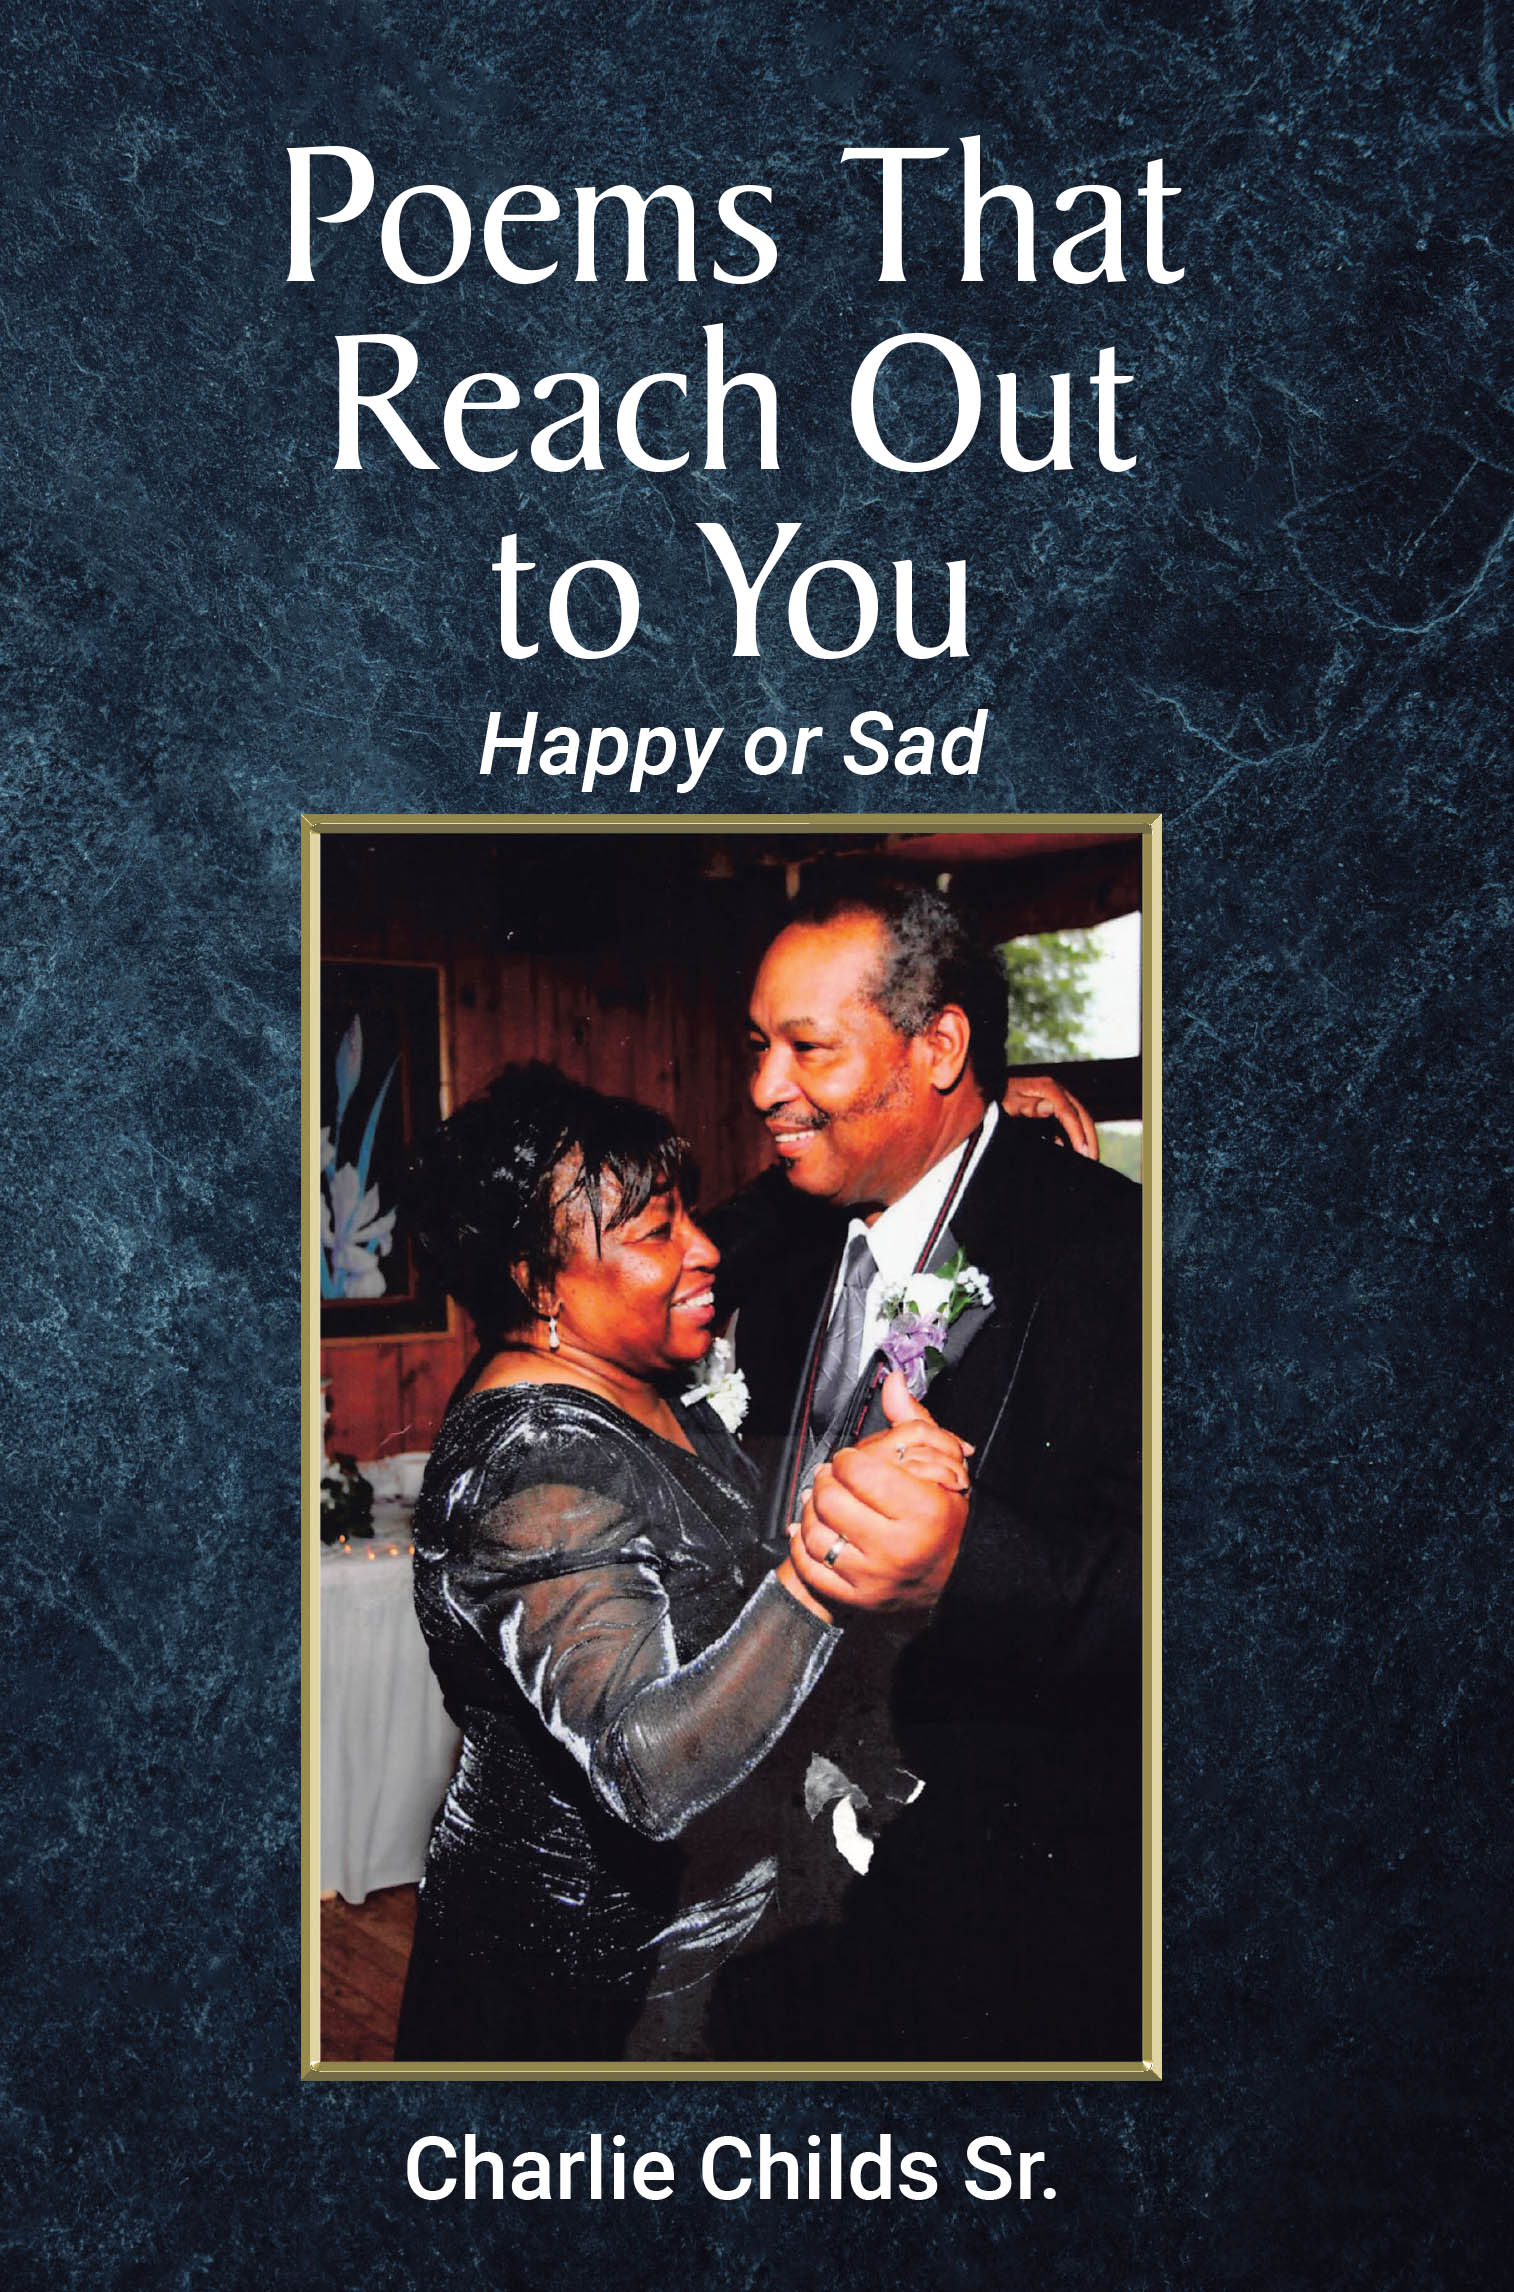 Charlie Childs Sr.’s Newly Released “The Poems That Reach Out to You: Happy or Sad” is a Heartfelt Collection of Verses Embracing Life’s Diverse Emotions